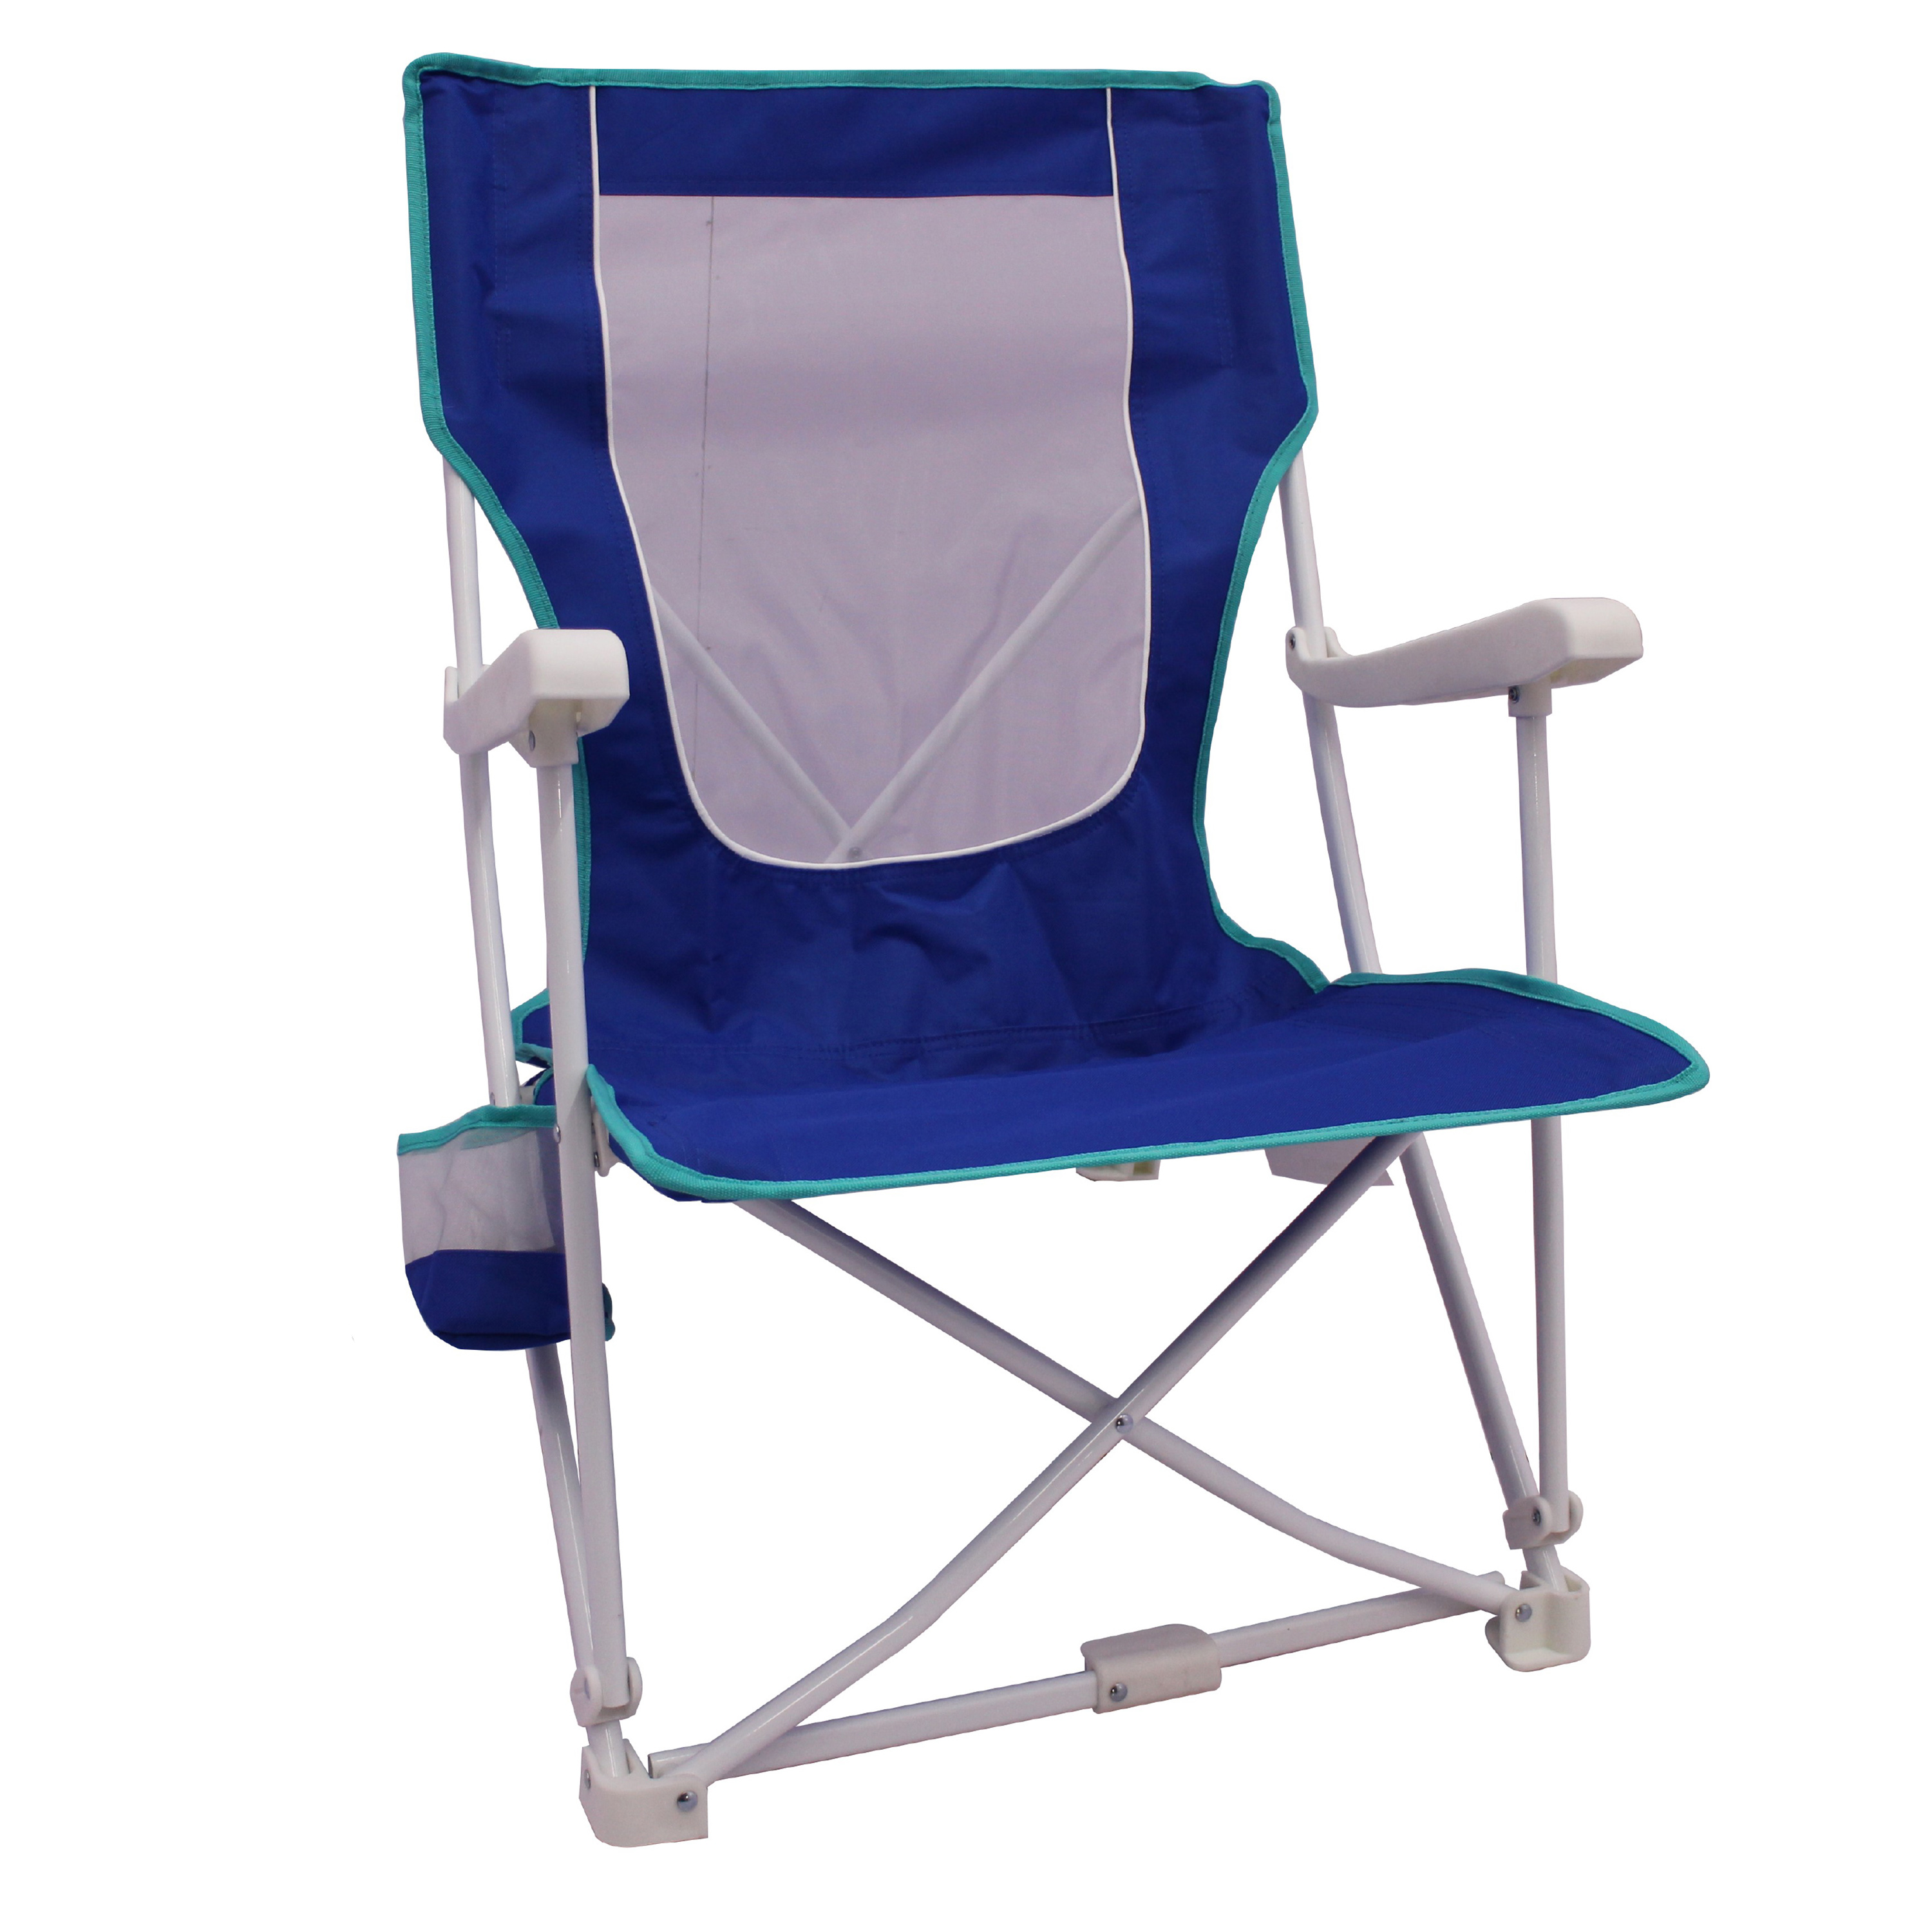 2-Pack Mainstays Folding Hard Arm Beach Bag Chair with Carry Bag, Blue - image 3 of 9